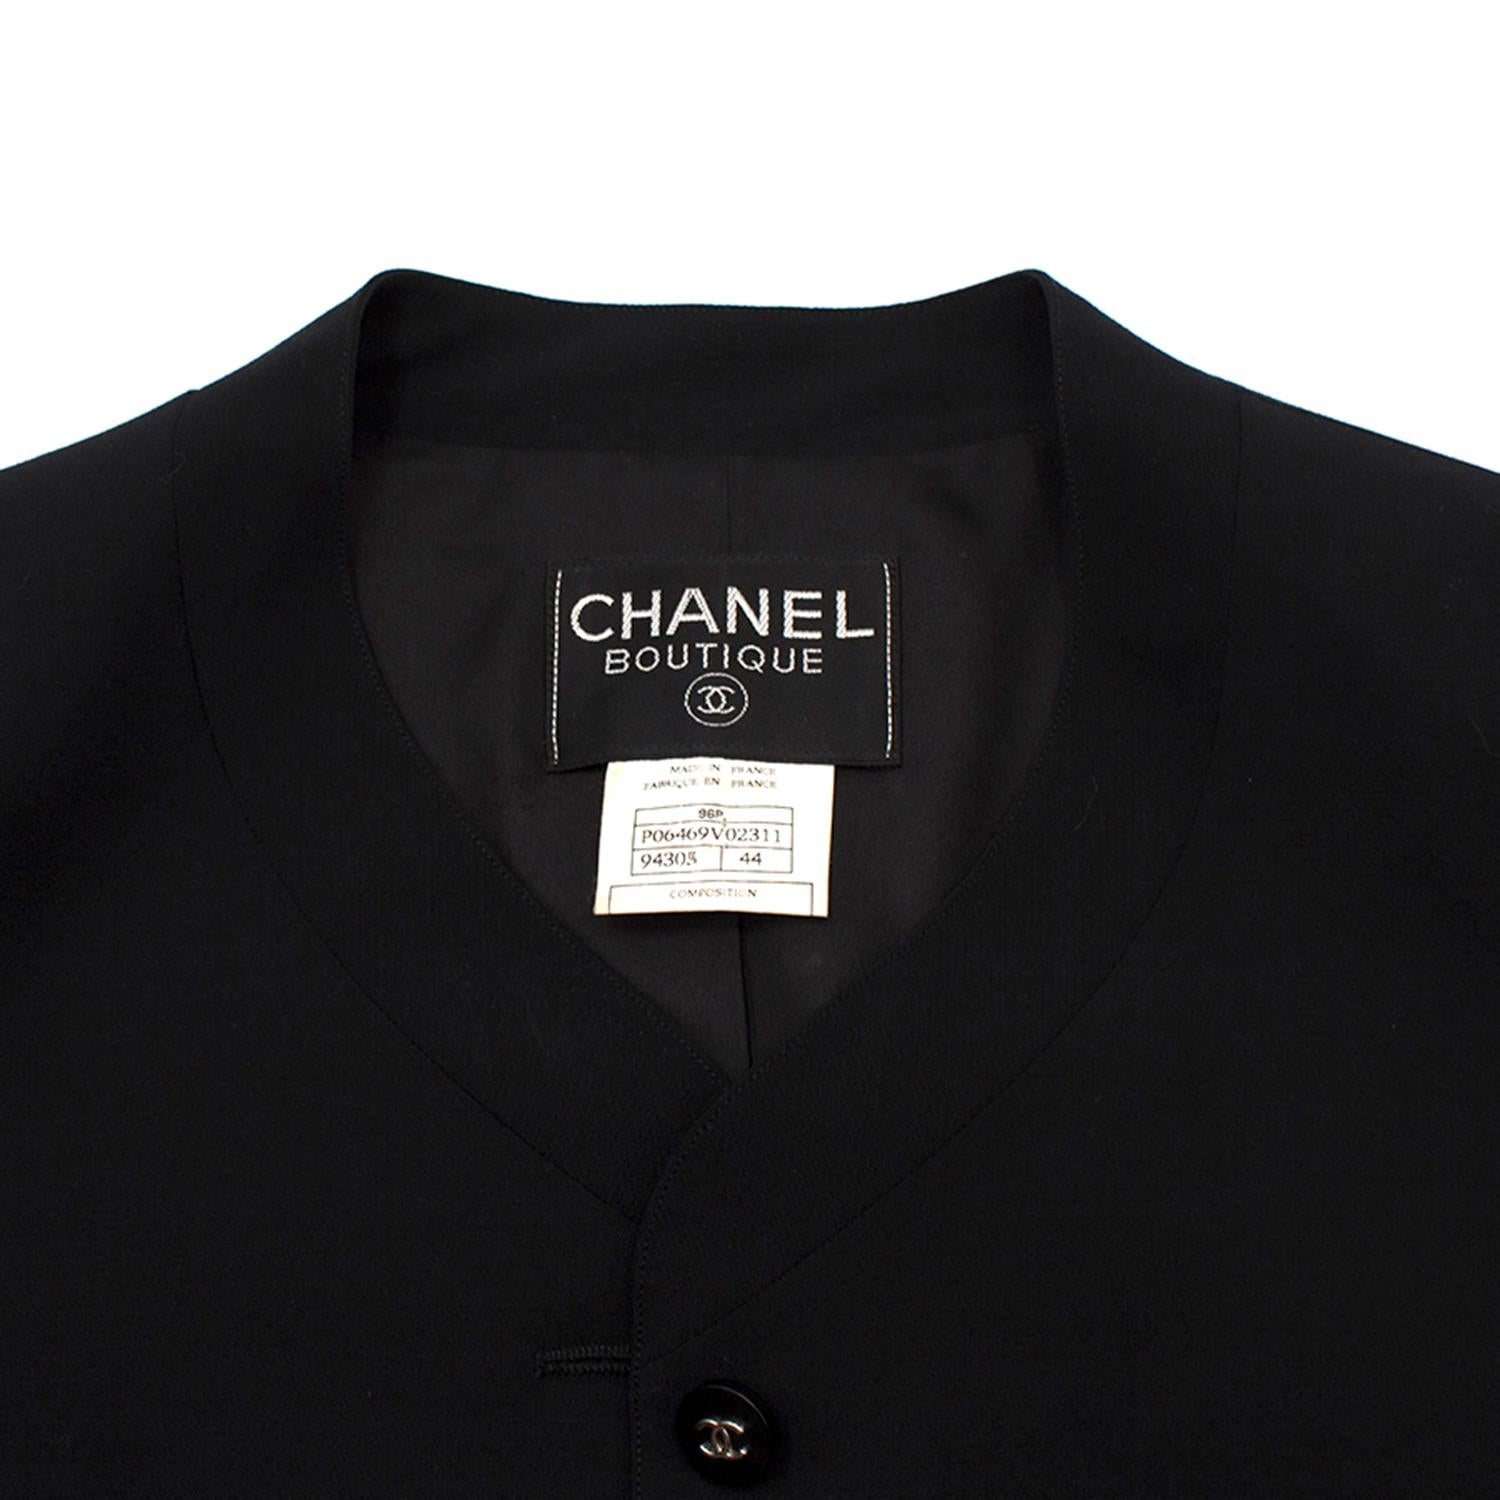 Chanel Boutique Black Lightweight Wool Blazer 

- 100% wool
- Lightweight
- 100% silk lining with CC embroidery
- Button front fastening
- Button-up cuffs
- Black plastic buttons with silver-tone CC embossed
- 4 welt pockets
- Collarless
- Padded